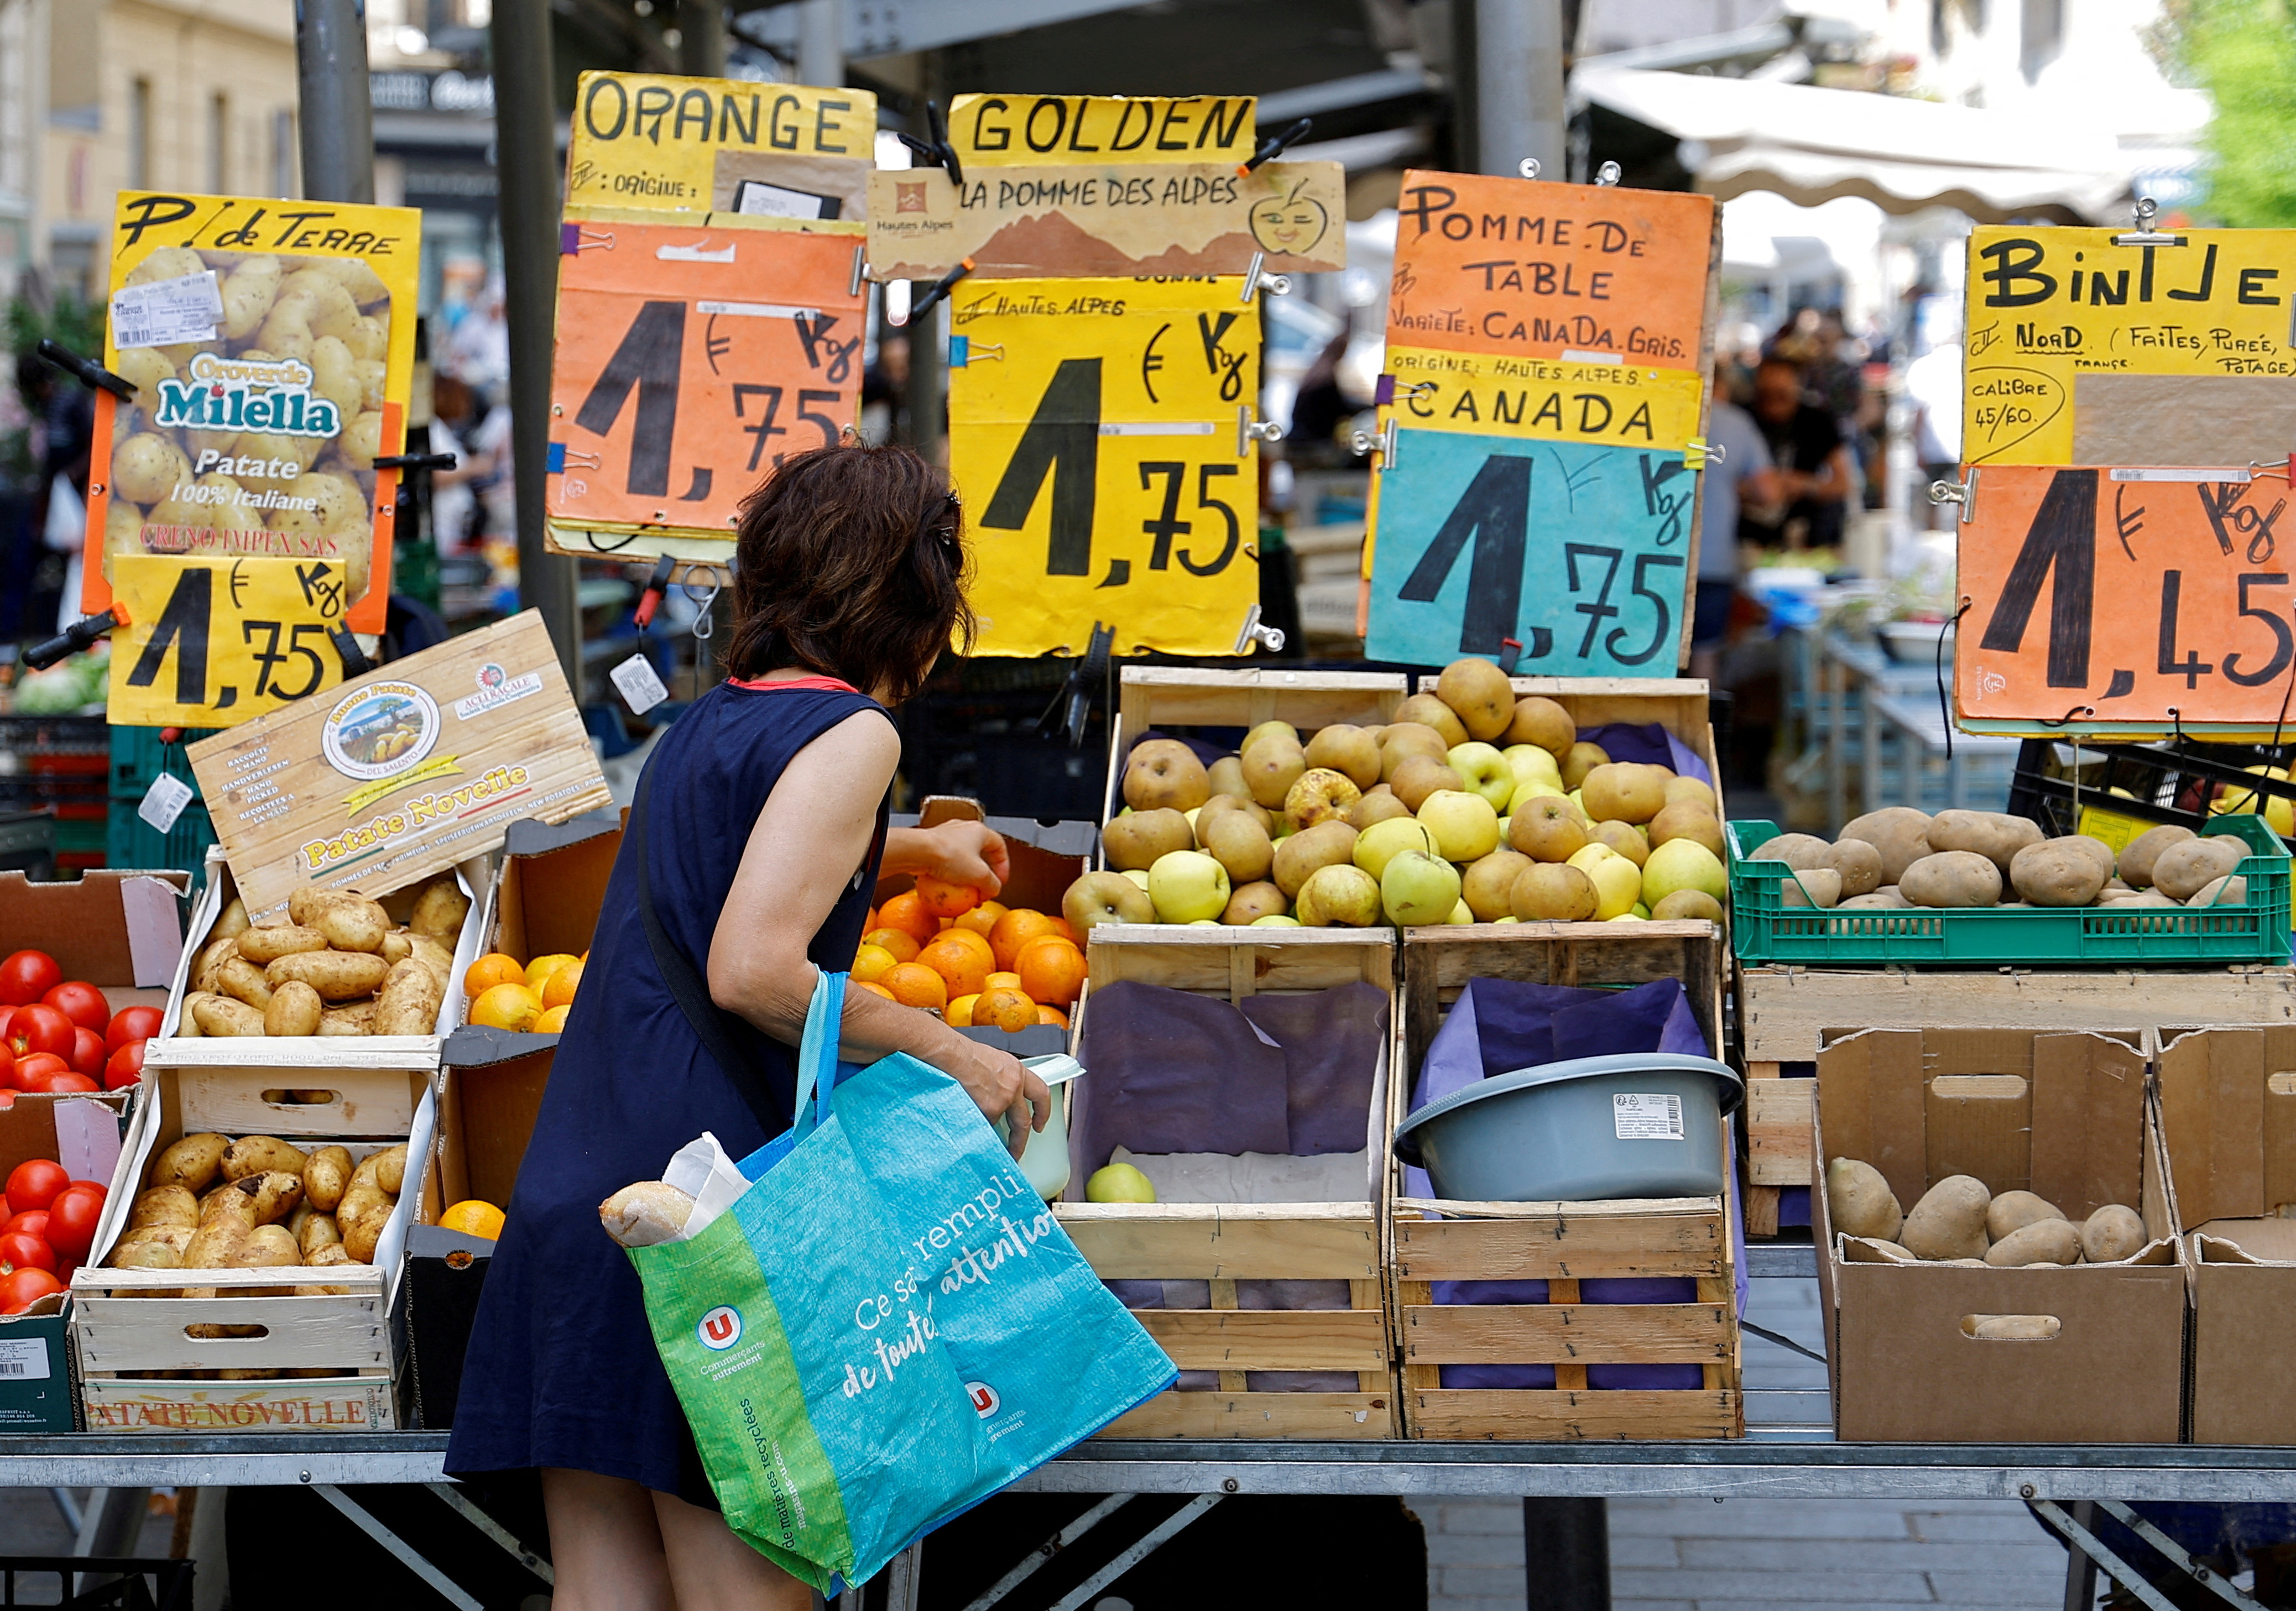 Price tags are seen as a woman shops at a local market in Nice